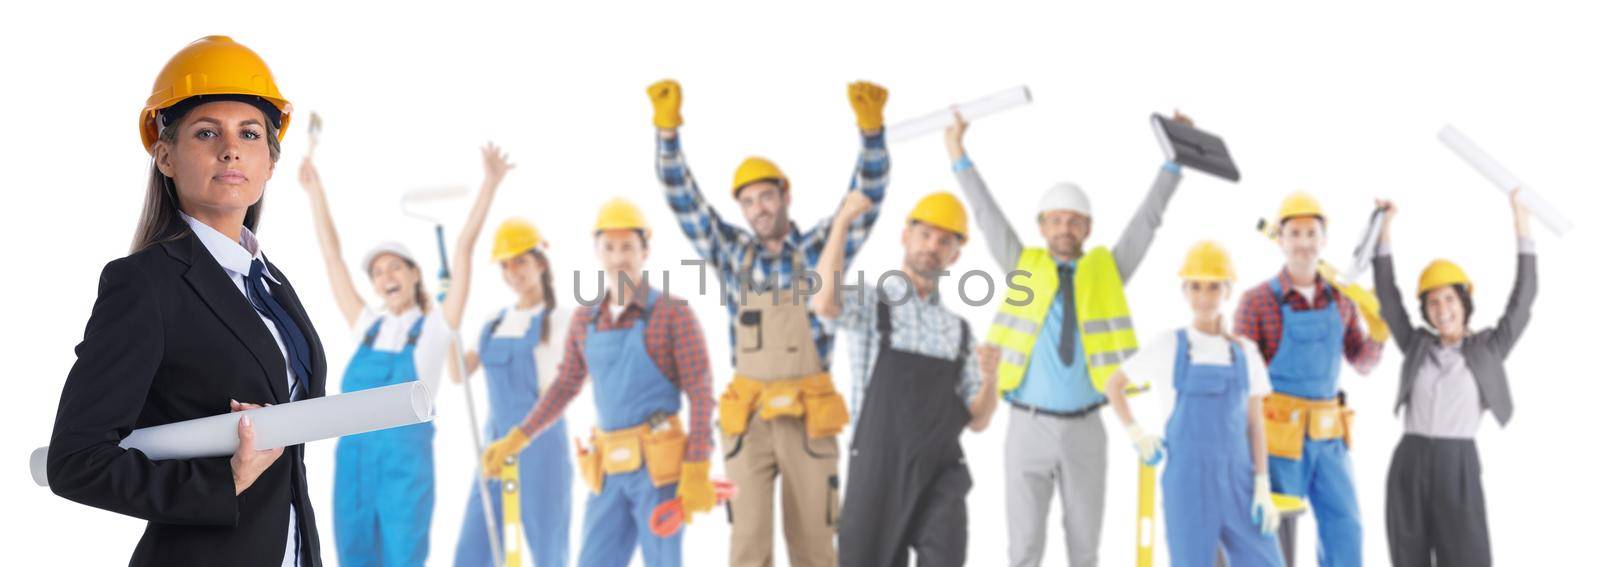 Female architect and confident construction industry workers isolated on white background